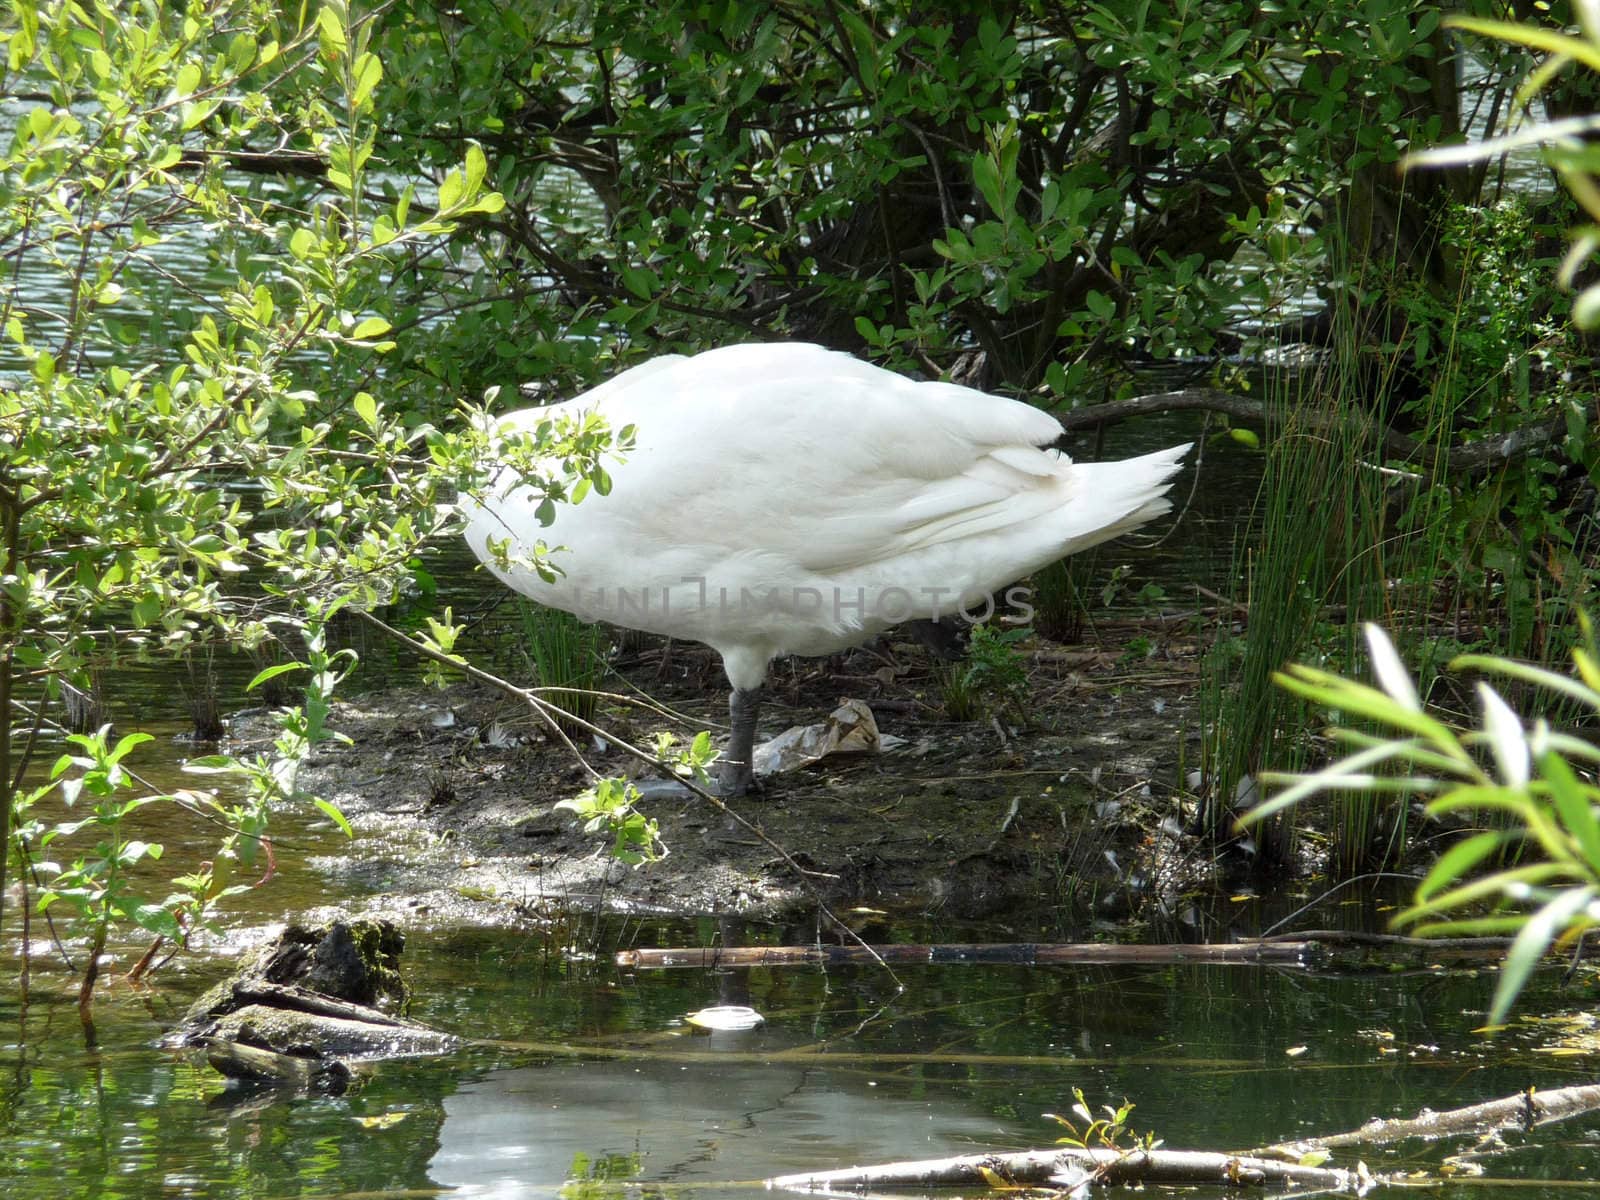 
A image of a swan resting on some mud next to a lake